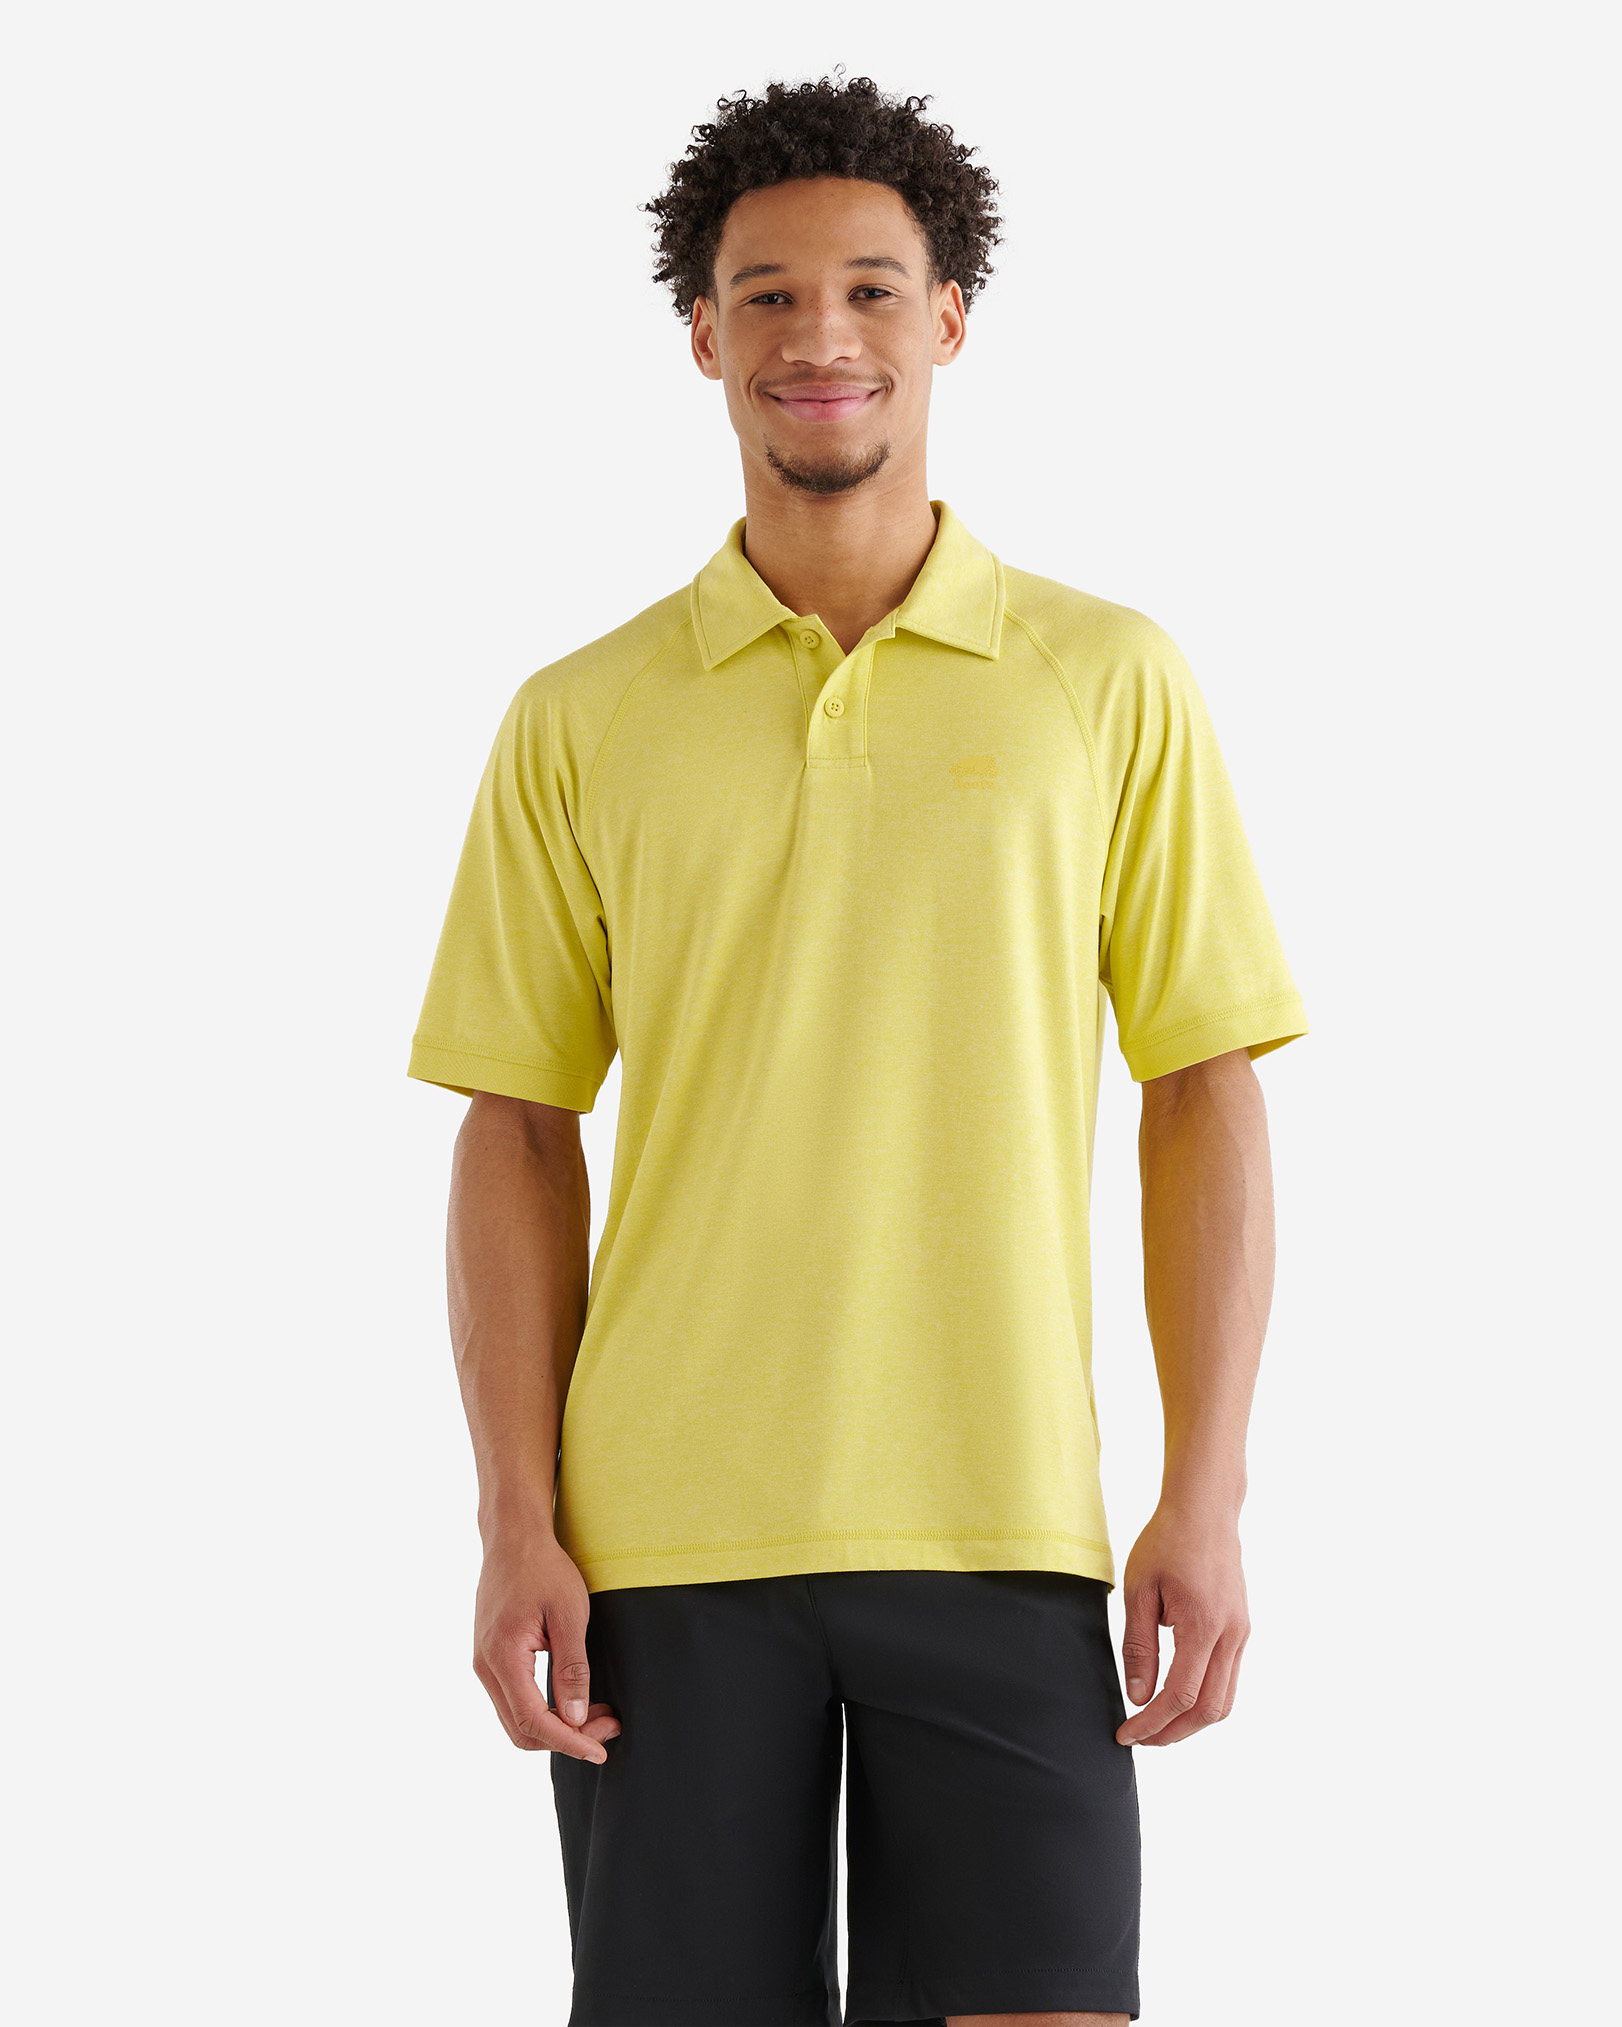 Roots Renew Peppered Polo T-Shirt in Acacia Yellow Pepper